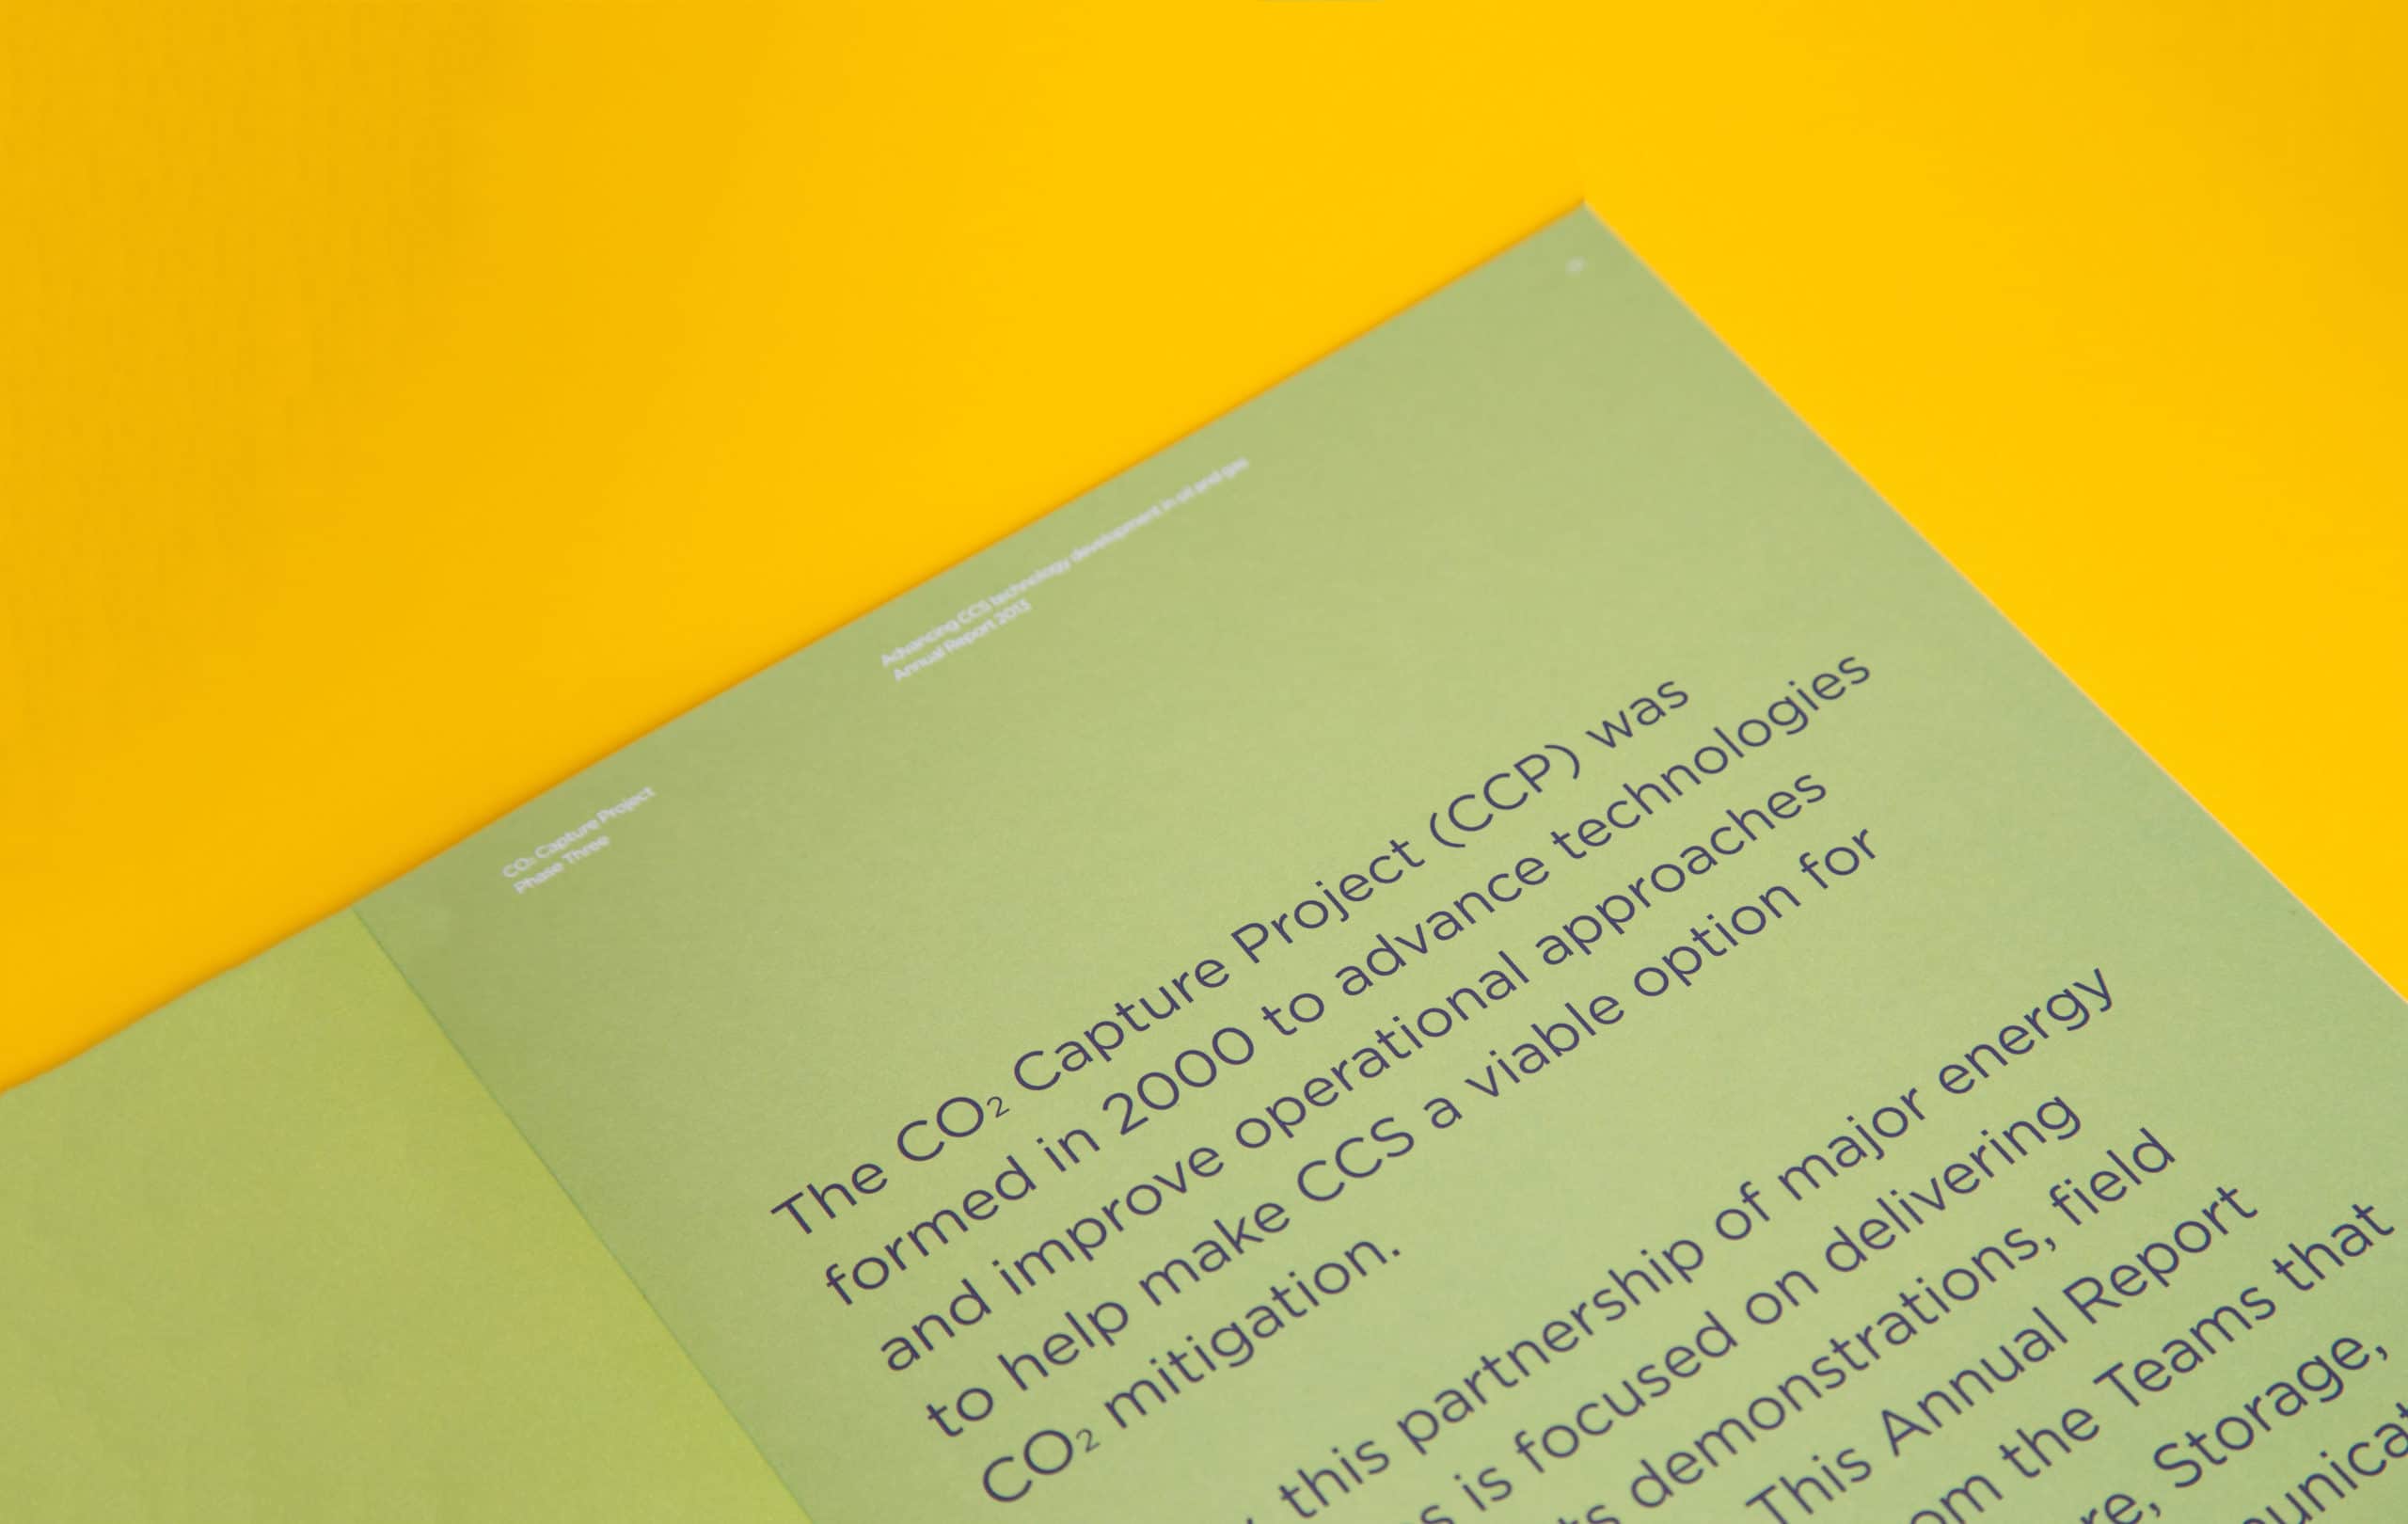 Yellow background and green book about CO2 capture